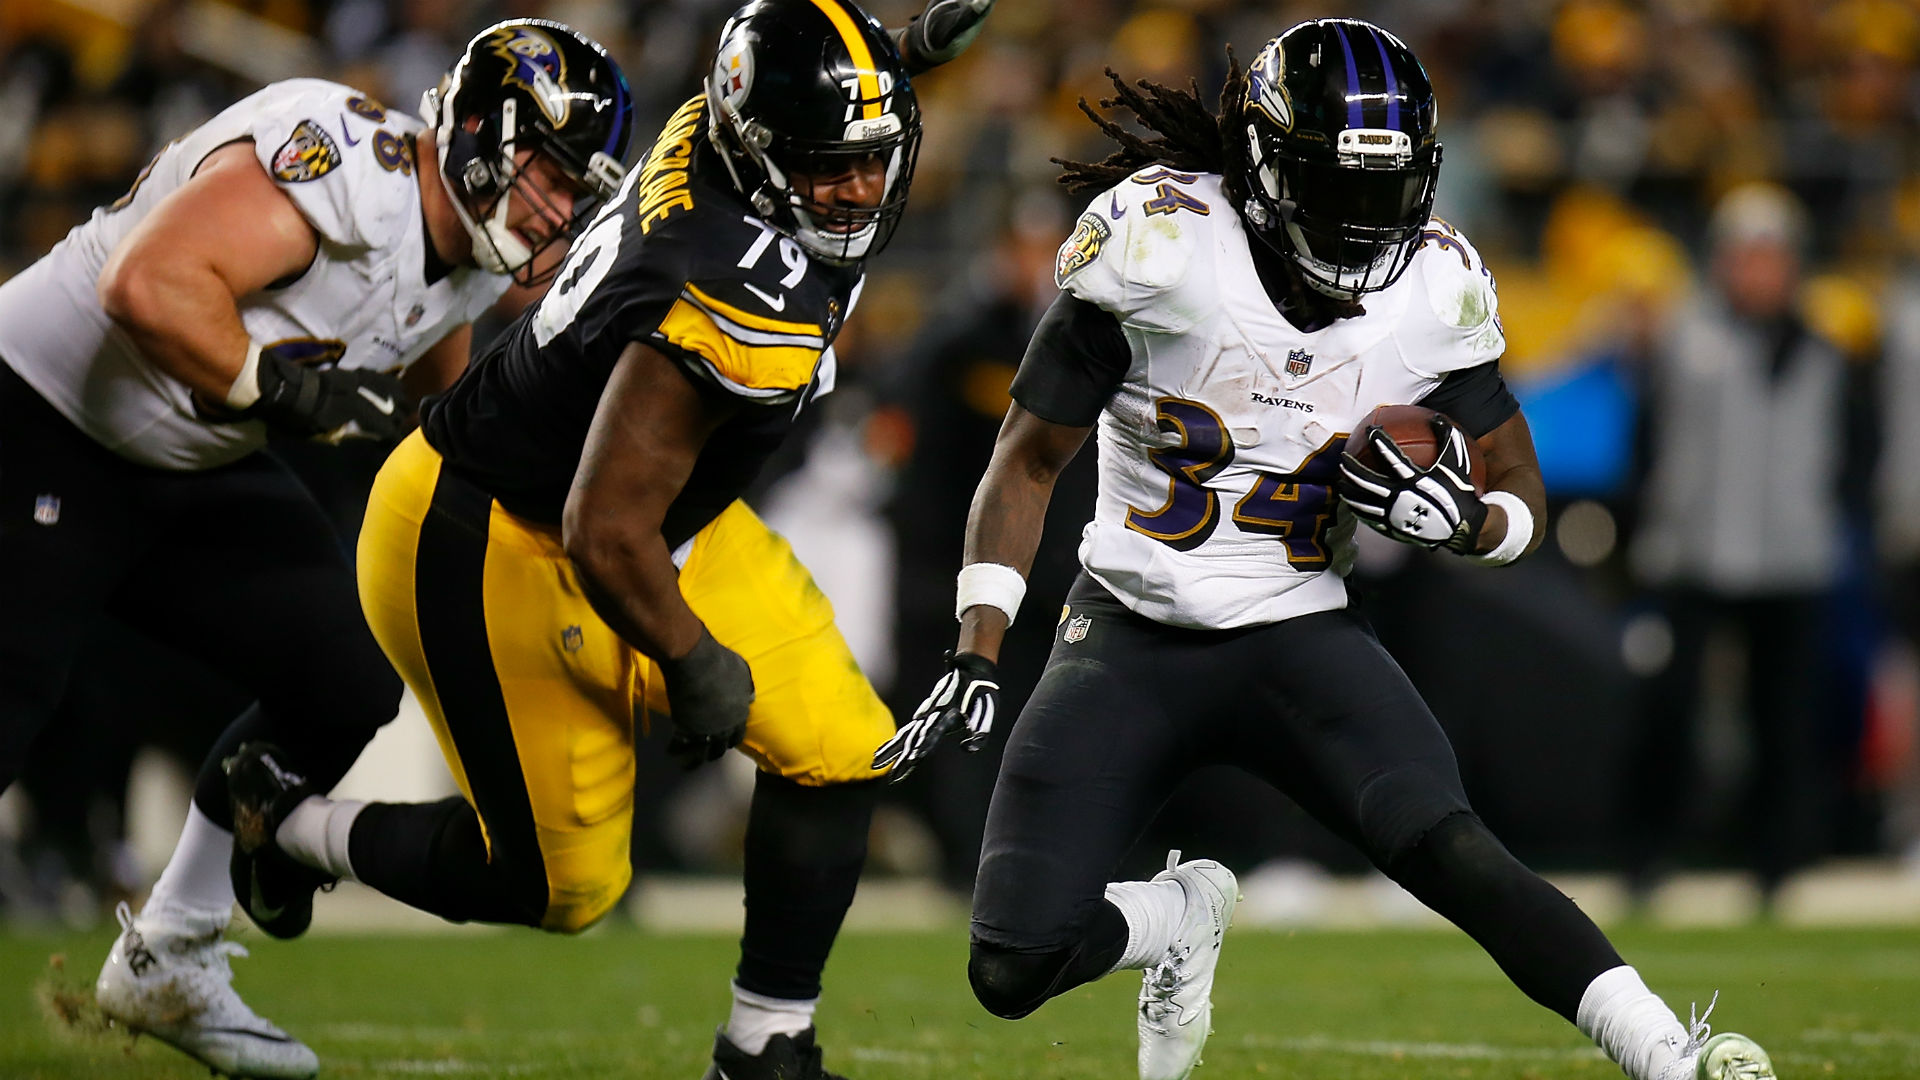 NFL injury news: Ravens place RB Alex Collins on IR, activate RB Kenneth Dixon